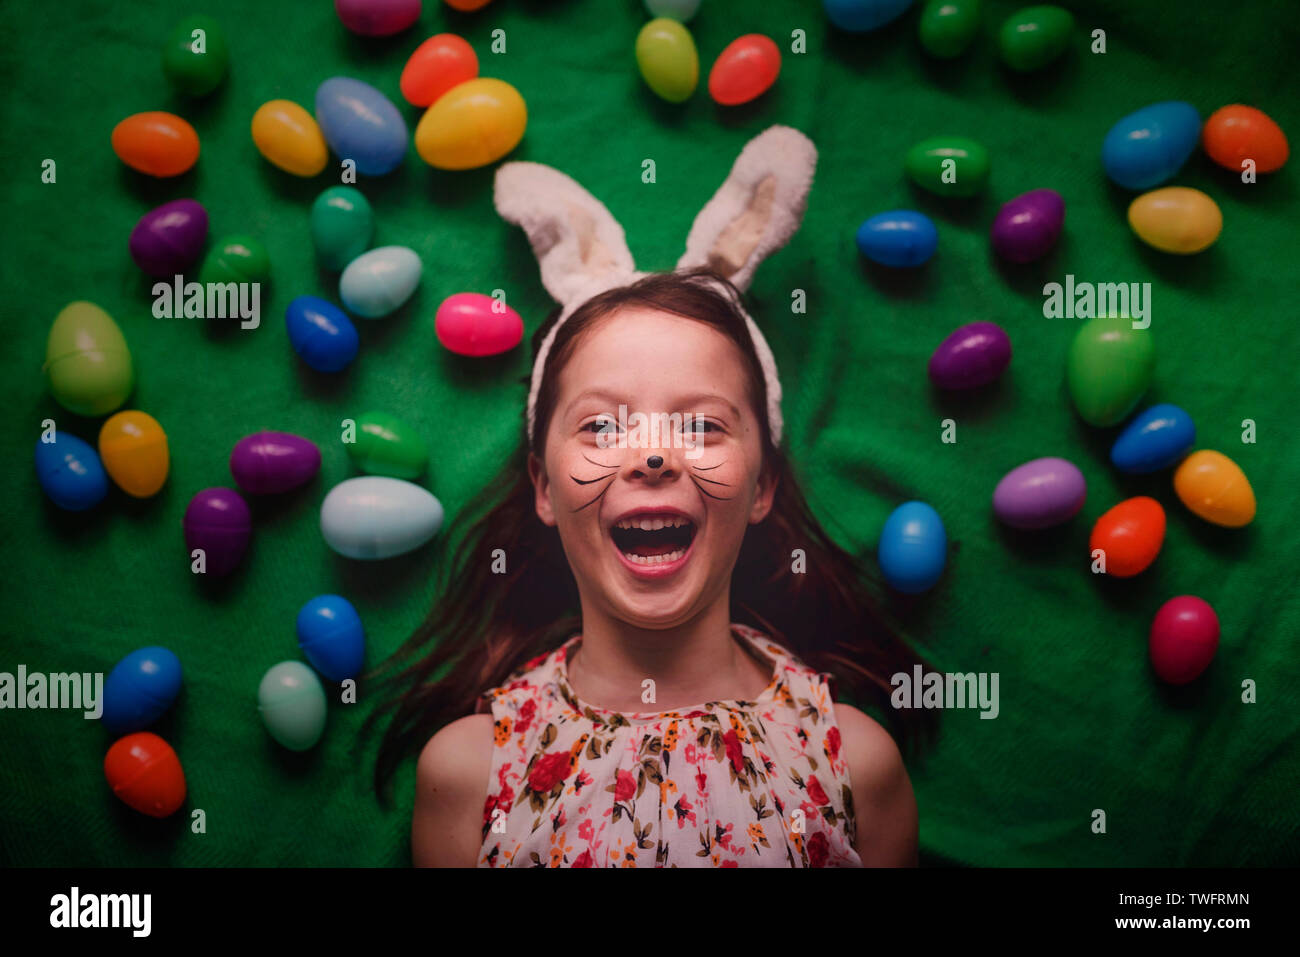 Overhead portrait of young girl wearing bunny ears surrounded by Easter eggs Stock Photo